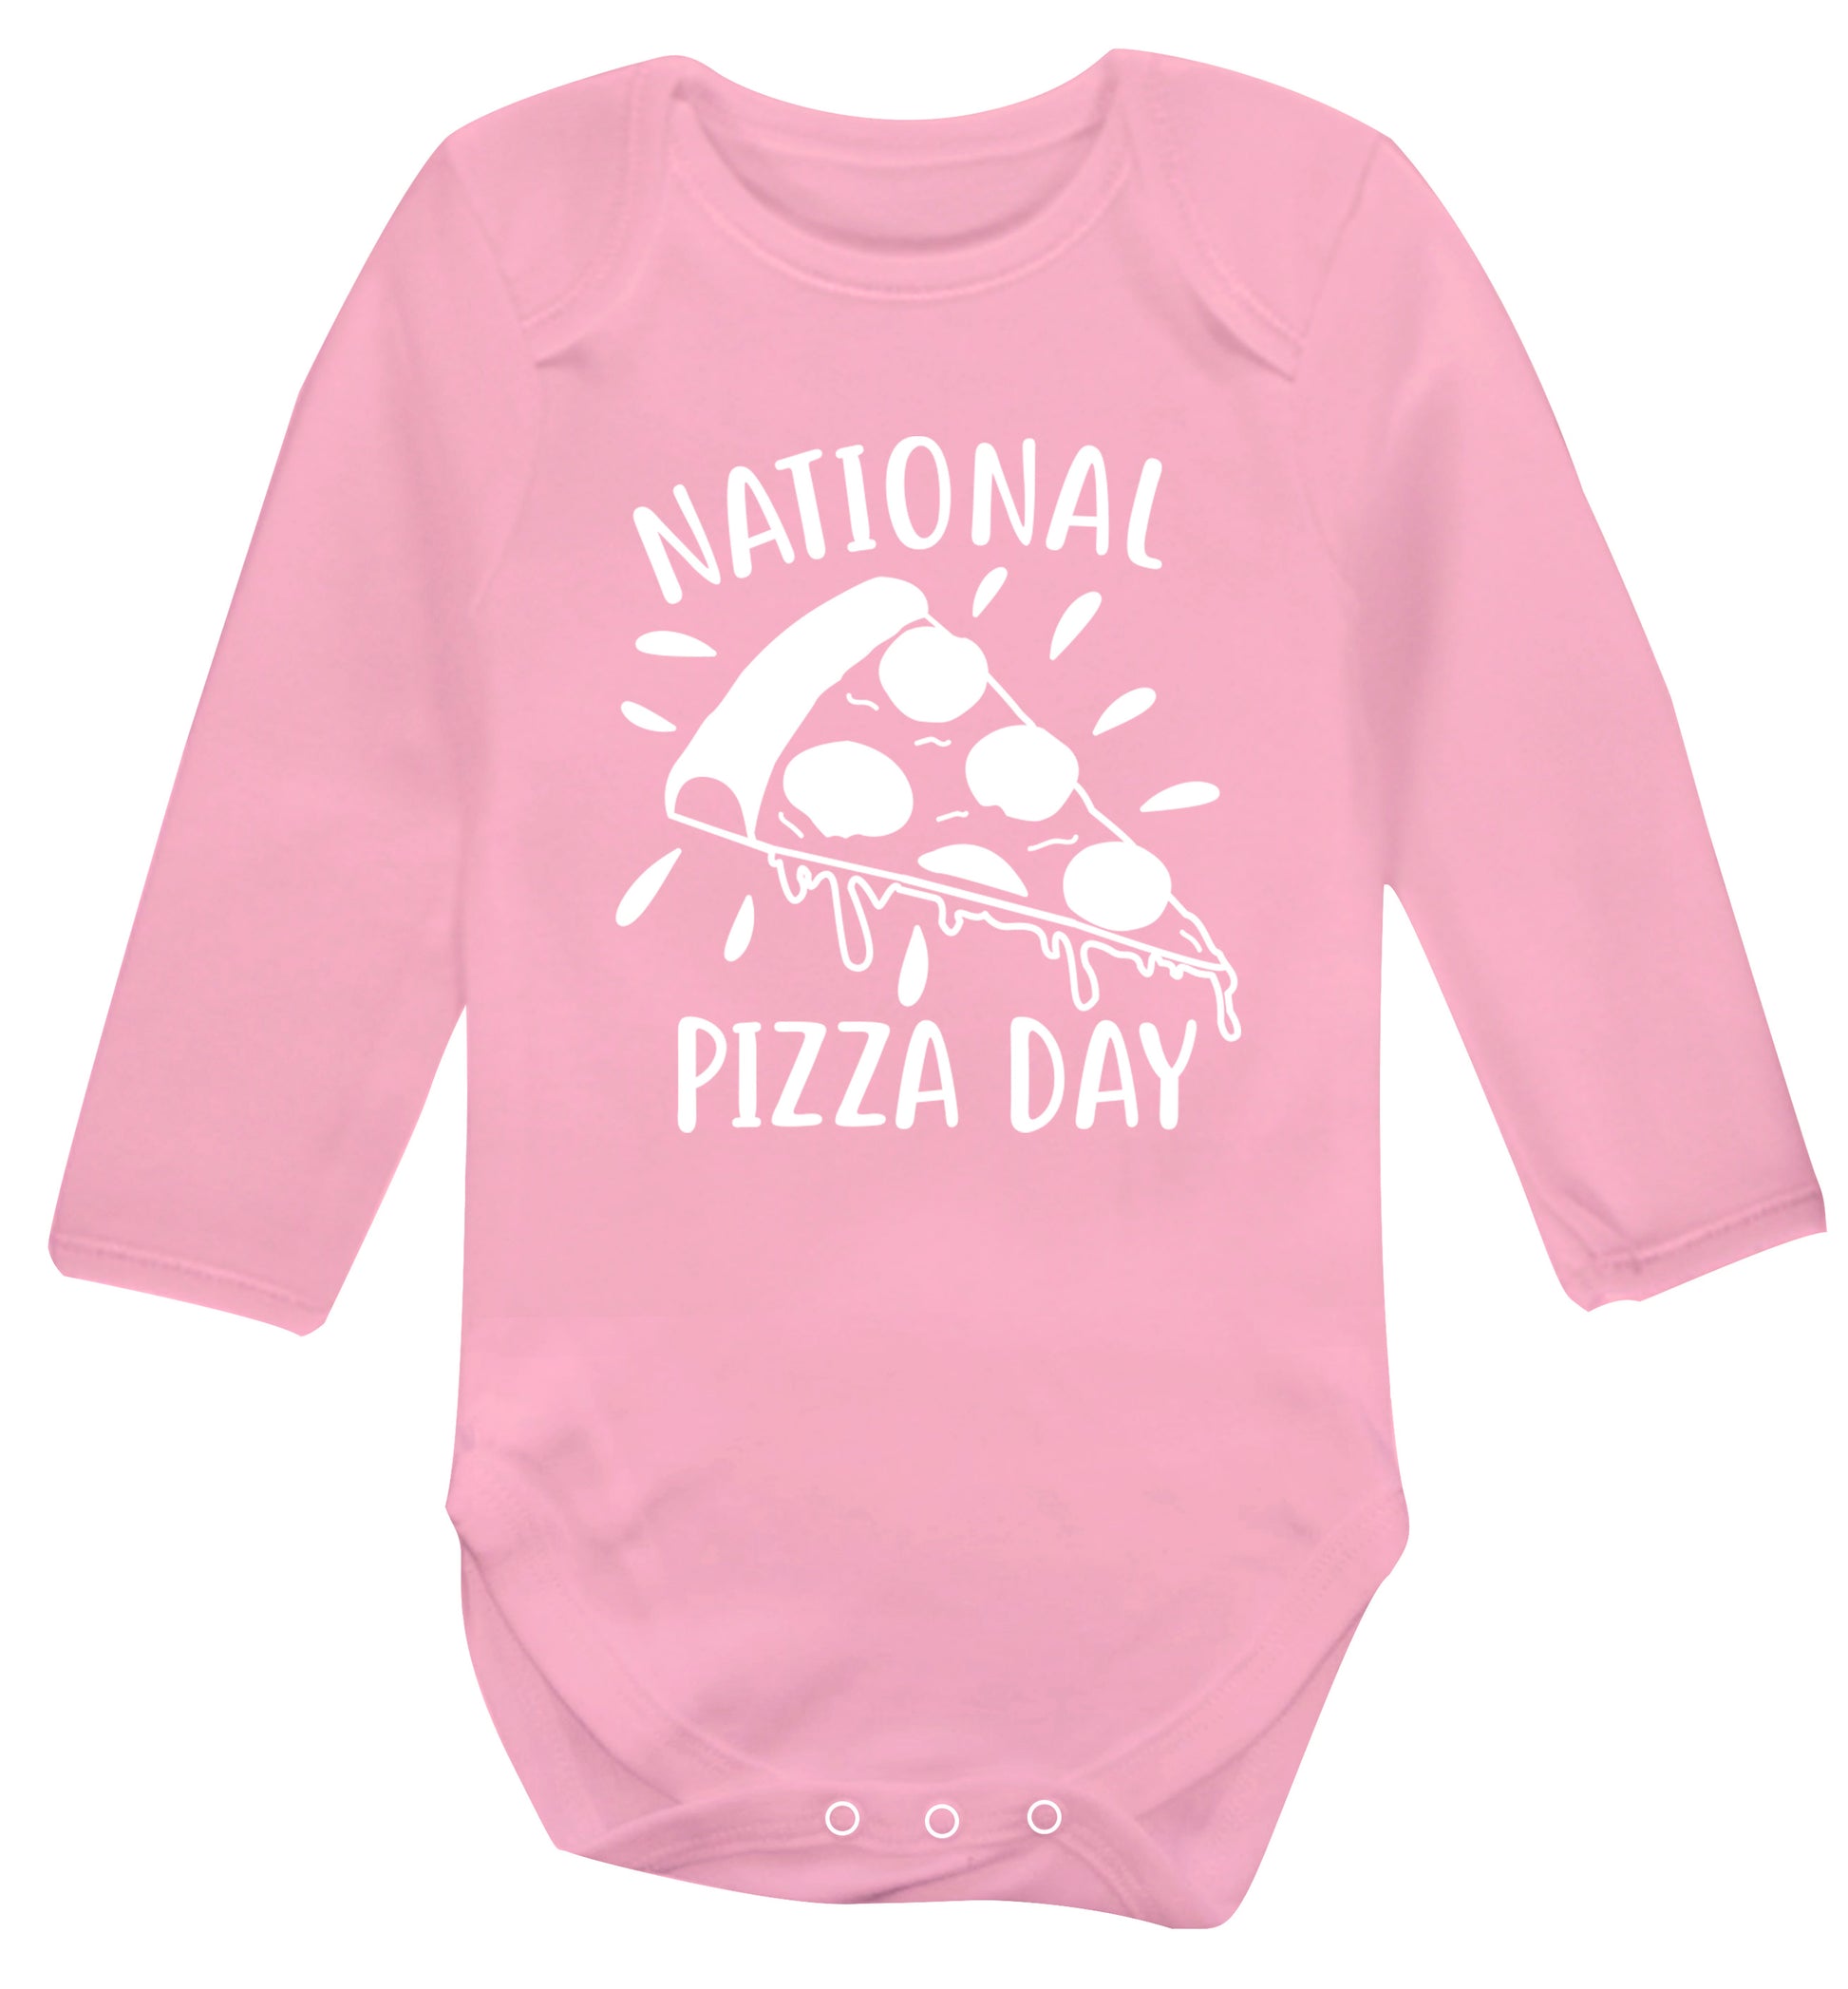 National pizza day Baby Vest long sleeved pale pink 6-12 months